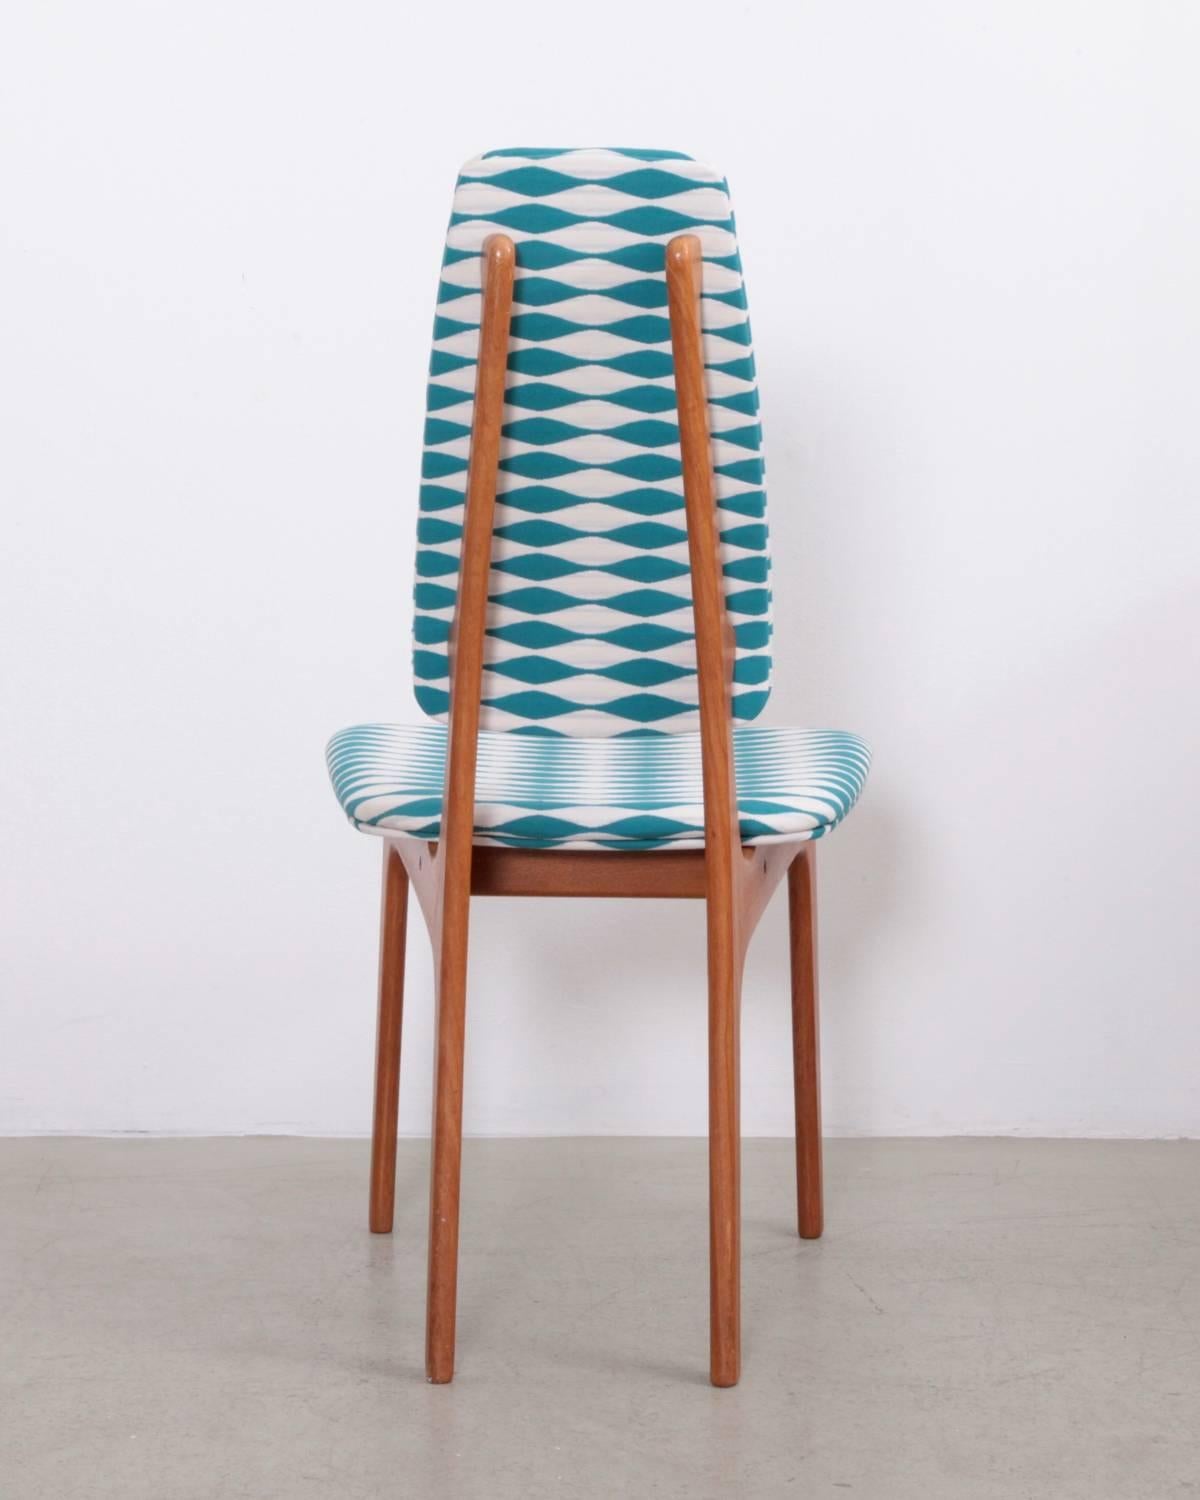 Refurbished dining chair set with new Jonathan Adler fabric in solid teak. A very comfy dining chair!